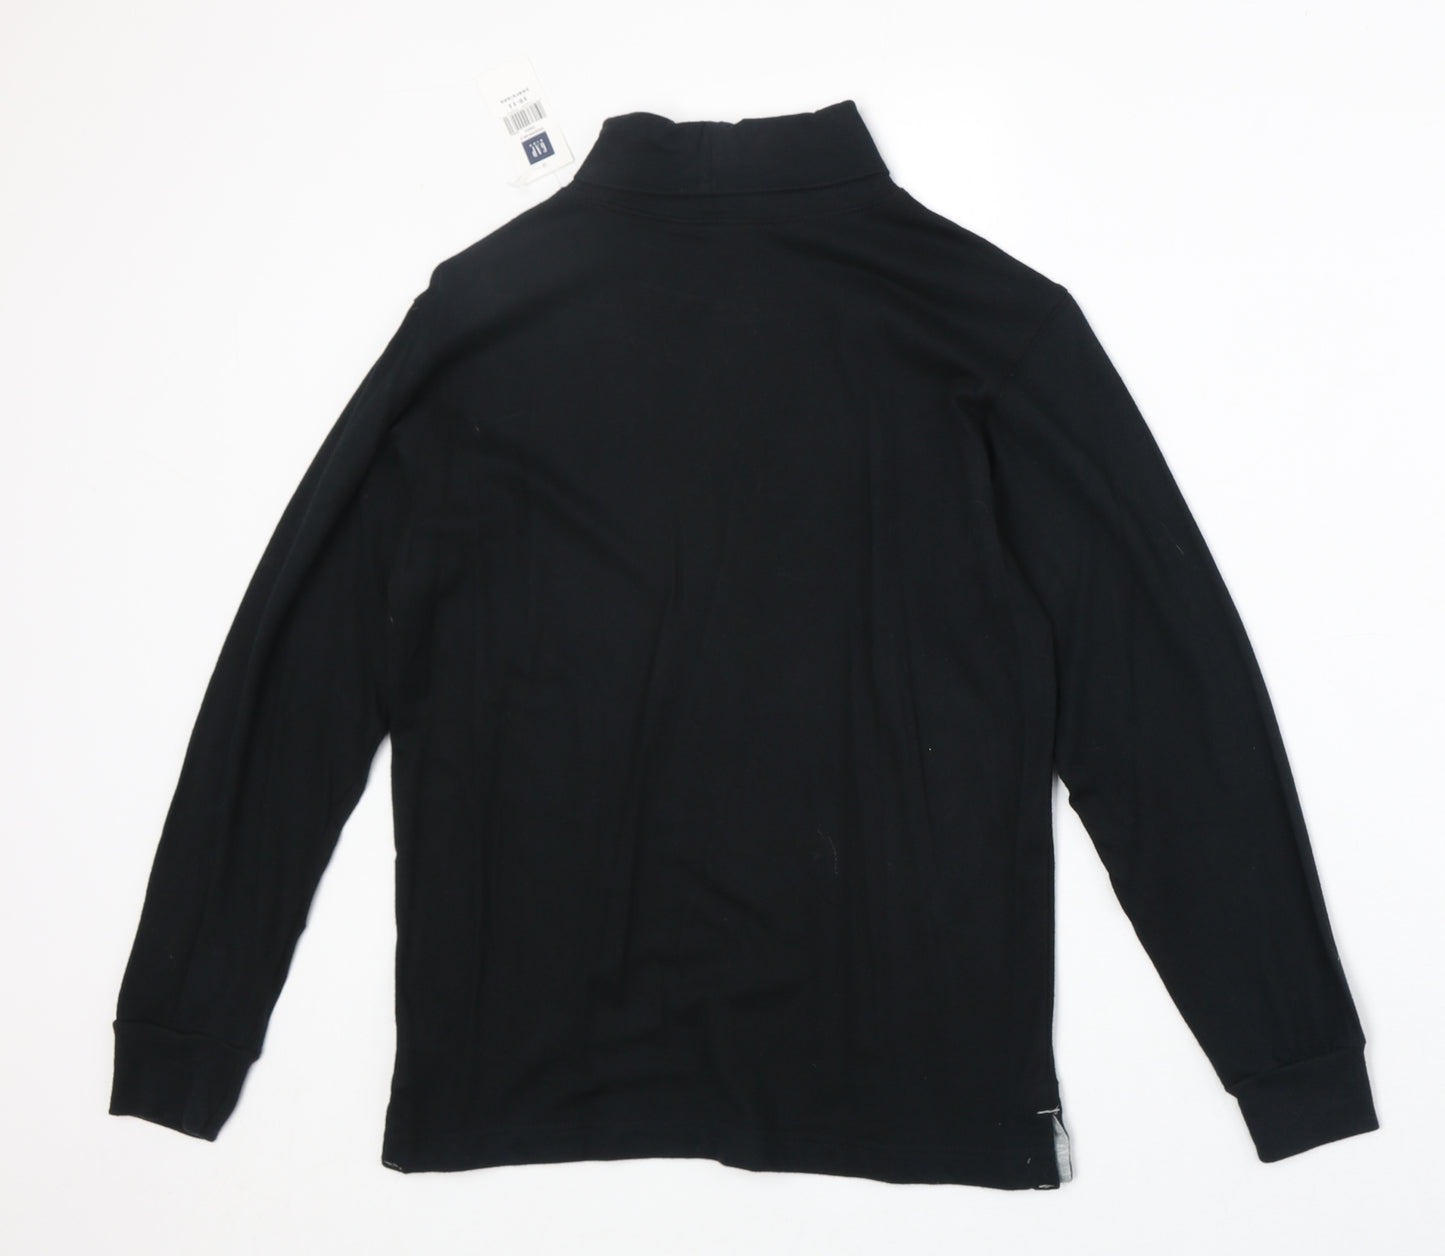 Gap Girls Black 100% Cotton Basic T-Shirt Size 10-11 Years Roll Neck Pullover